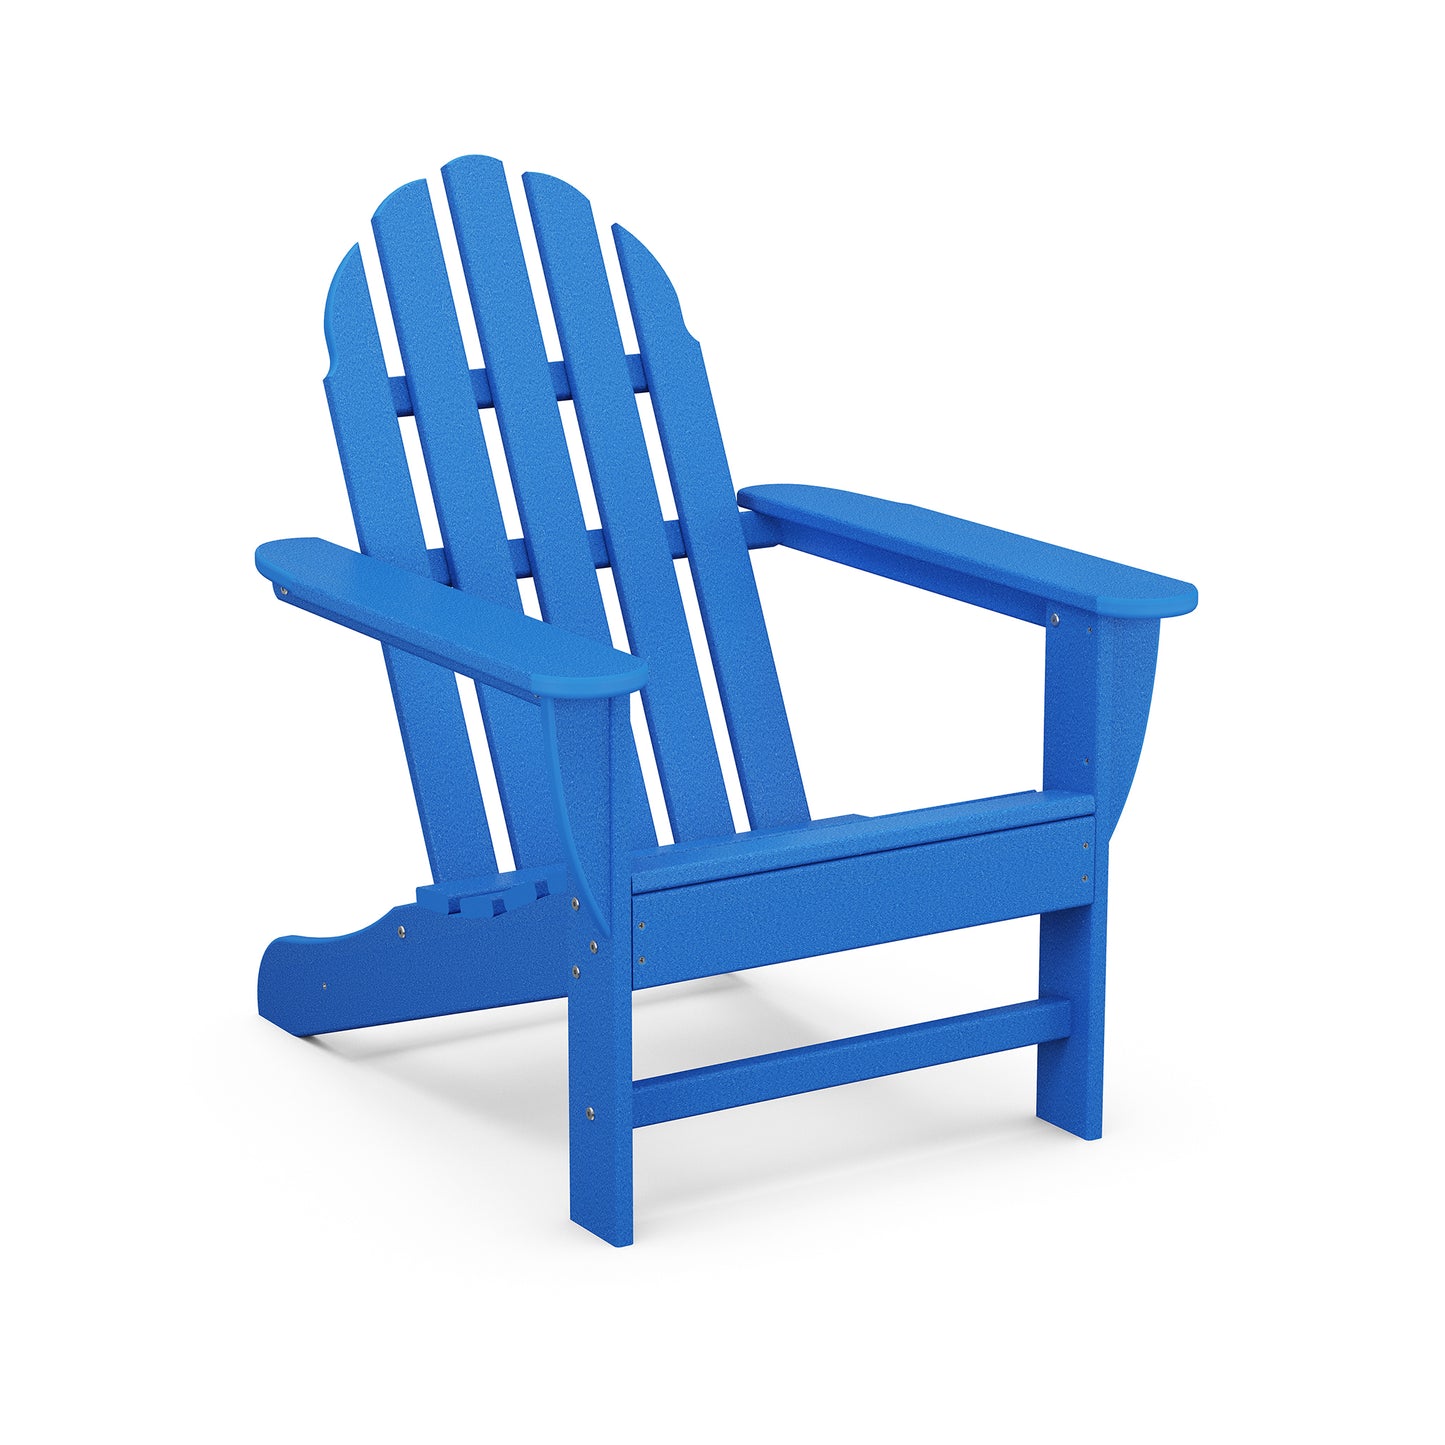 A bright blue POLYWOOD Classic Adirondack chair with a slatted back and seat, wide armrests, and a slightly reclined design, isolated on a white background.